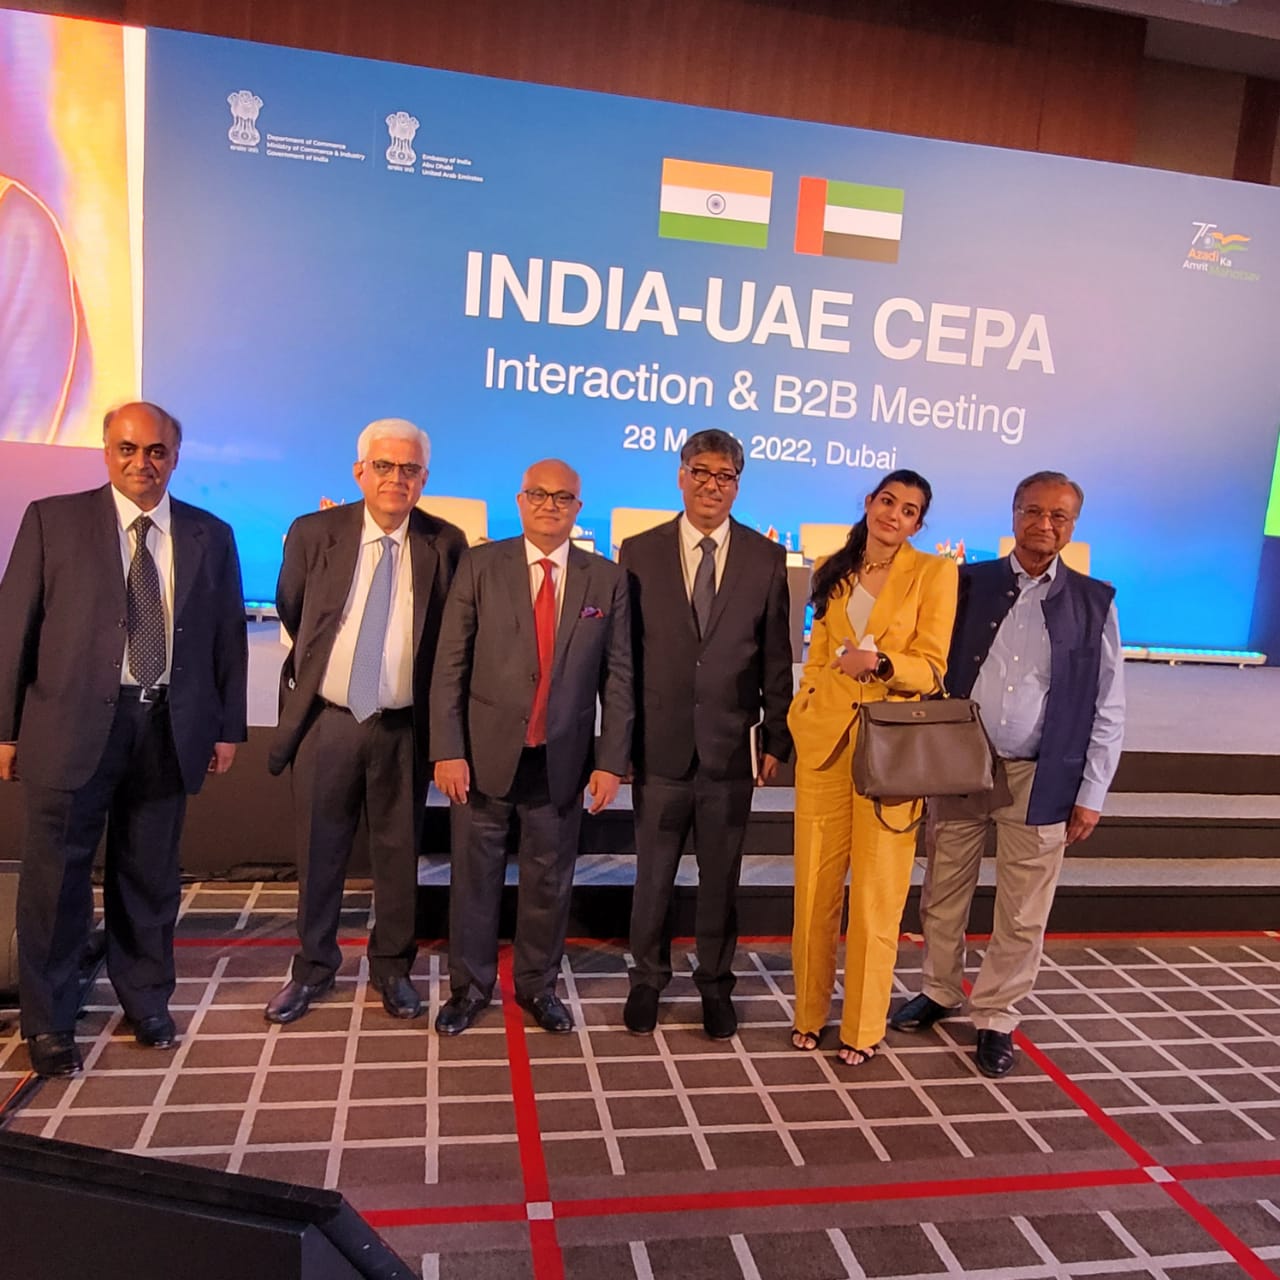 TEXPROCIL delegation at India-UAE CEPA Meet at Dubai on 28th March 2022